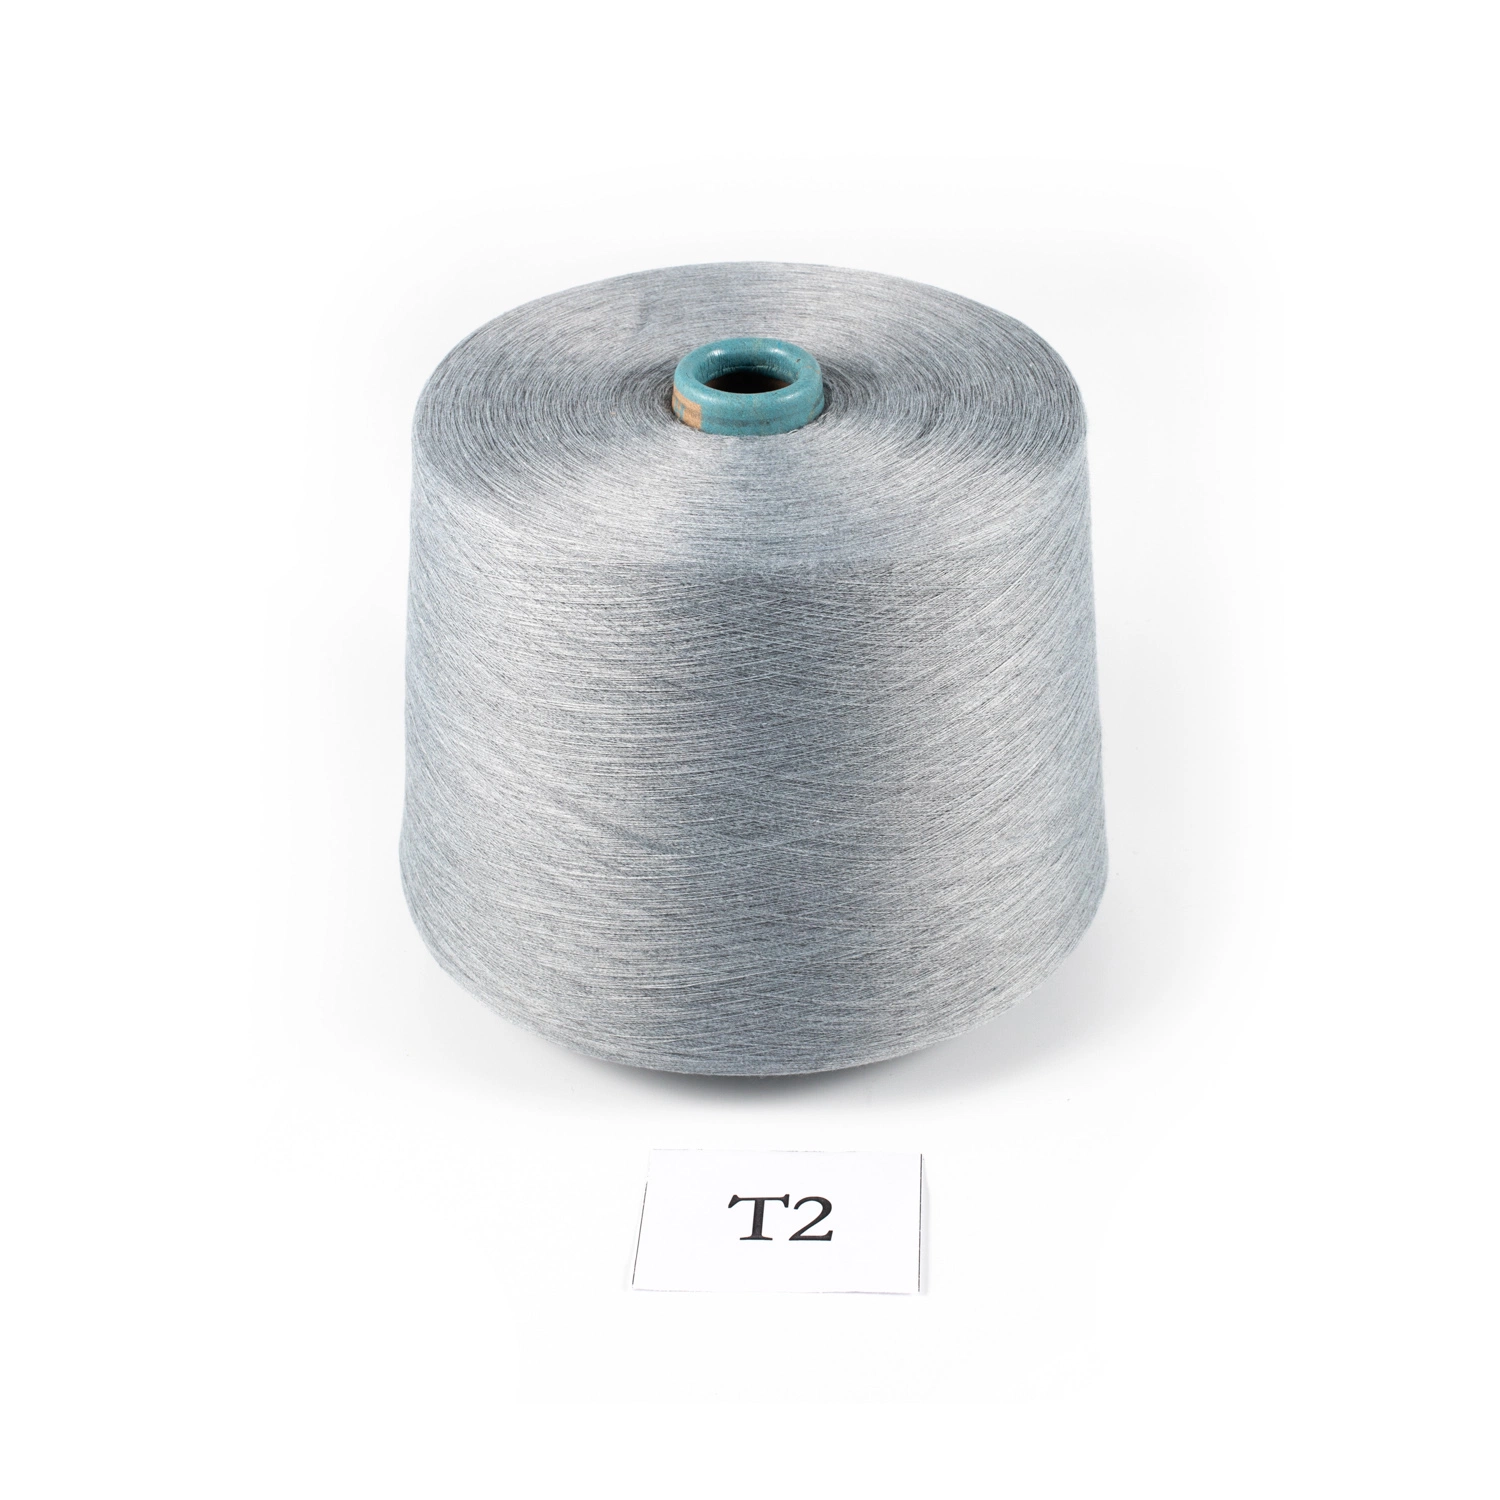 Xk Hot Sale Recycle Grs Certification Acy Polyester Yarn with Spandex Elastic Air Covered Yarn Weaving